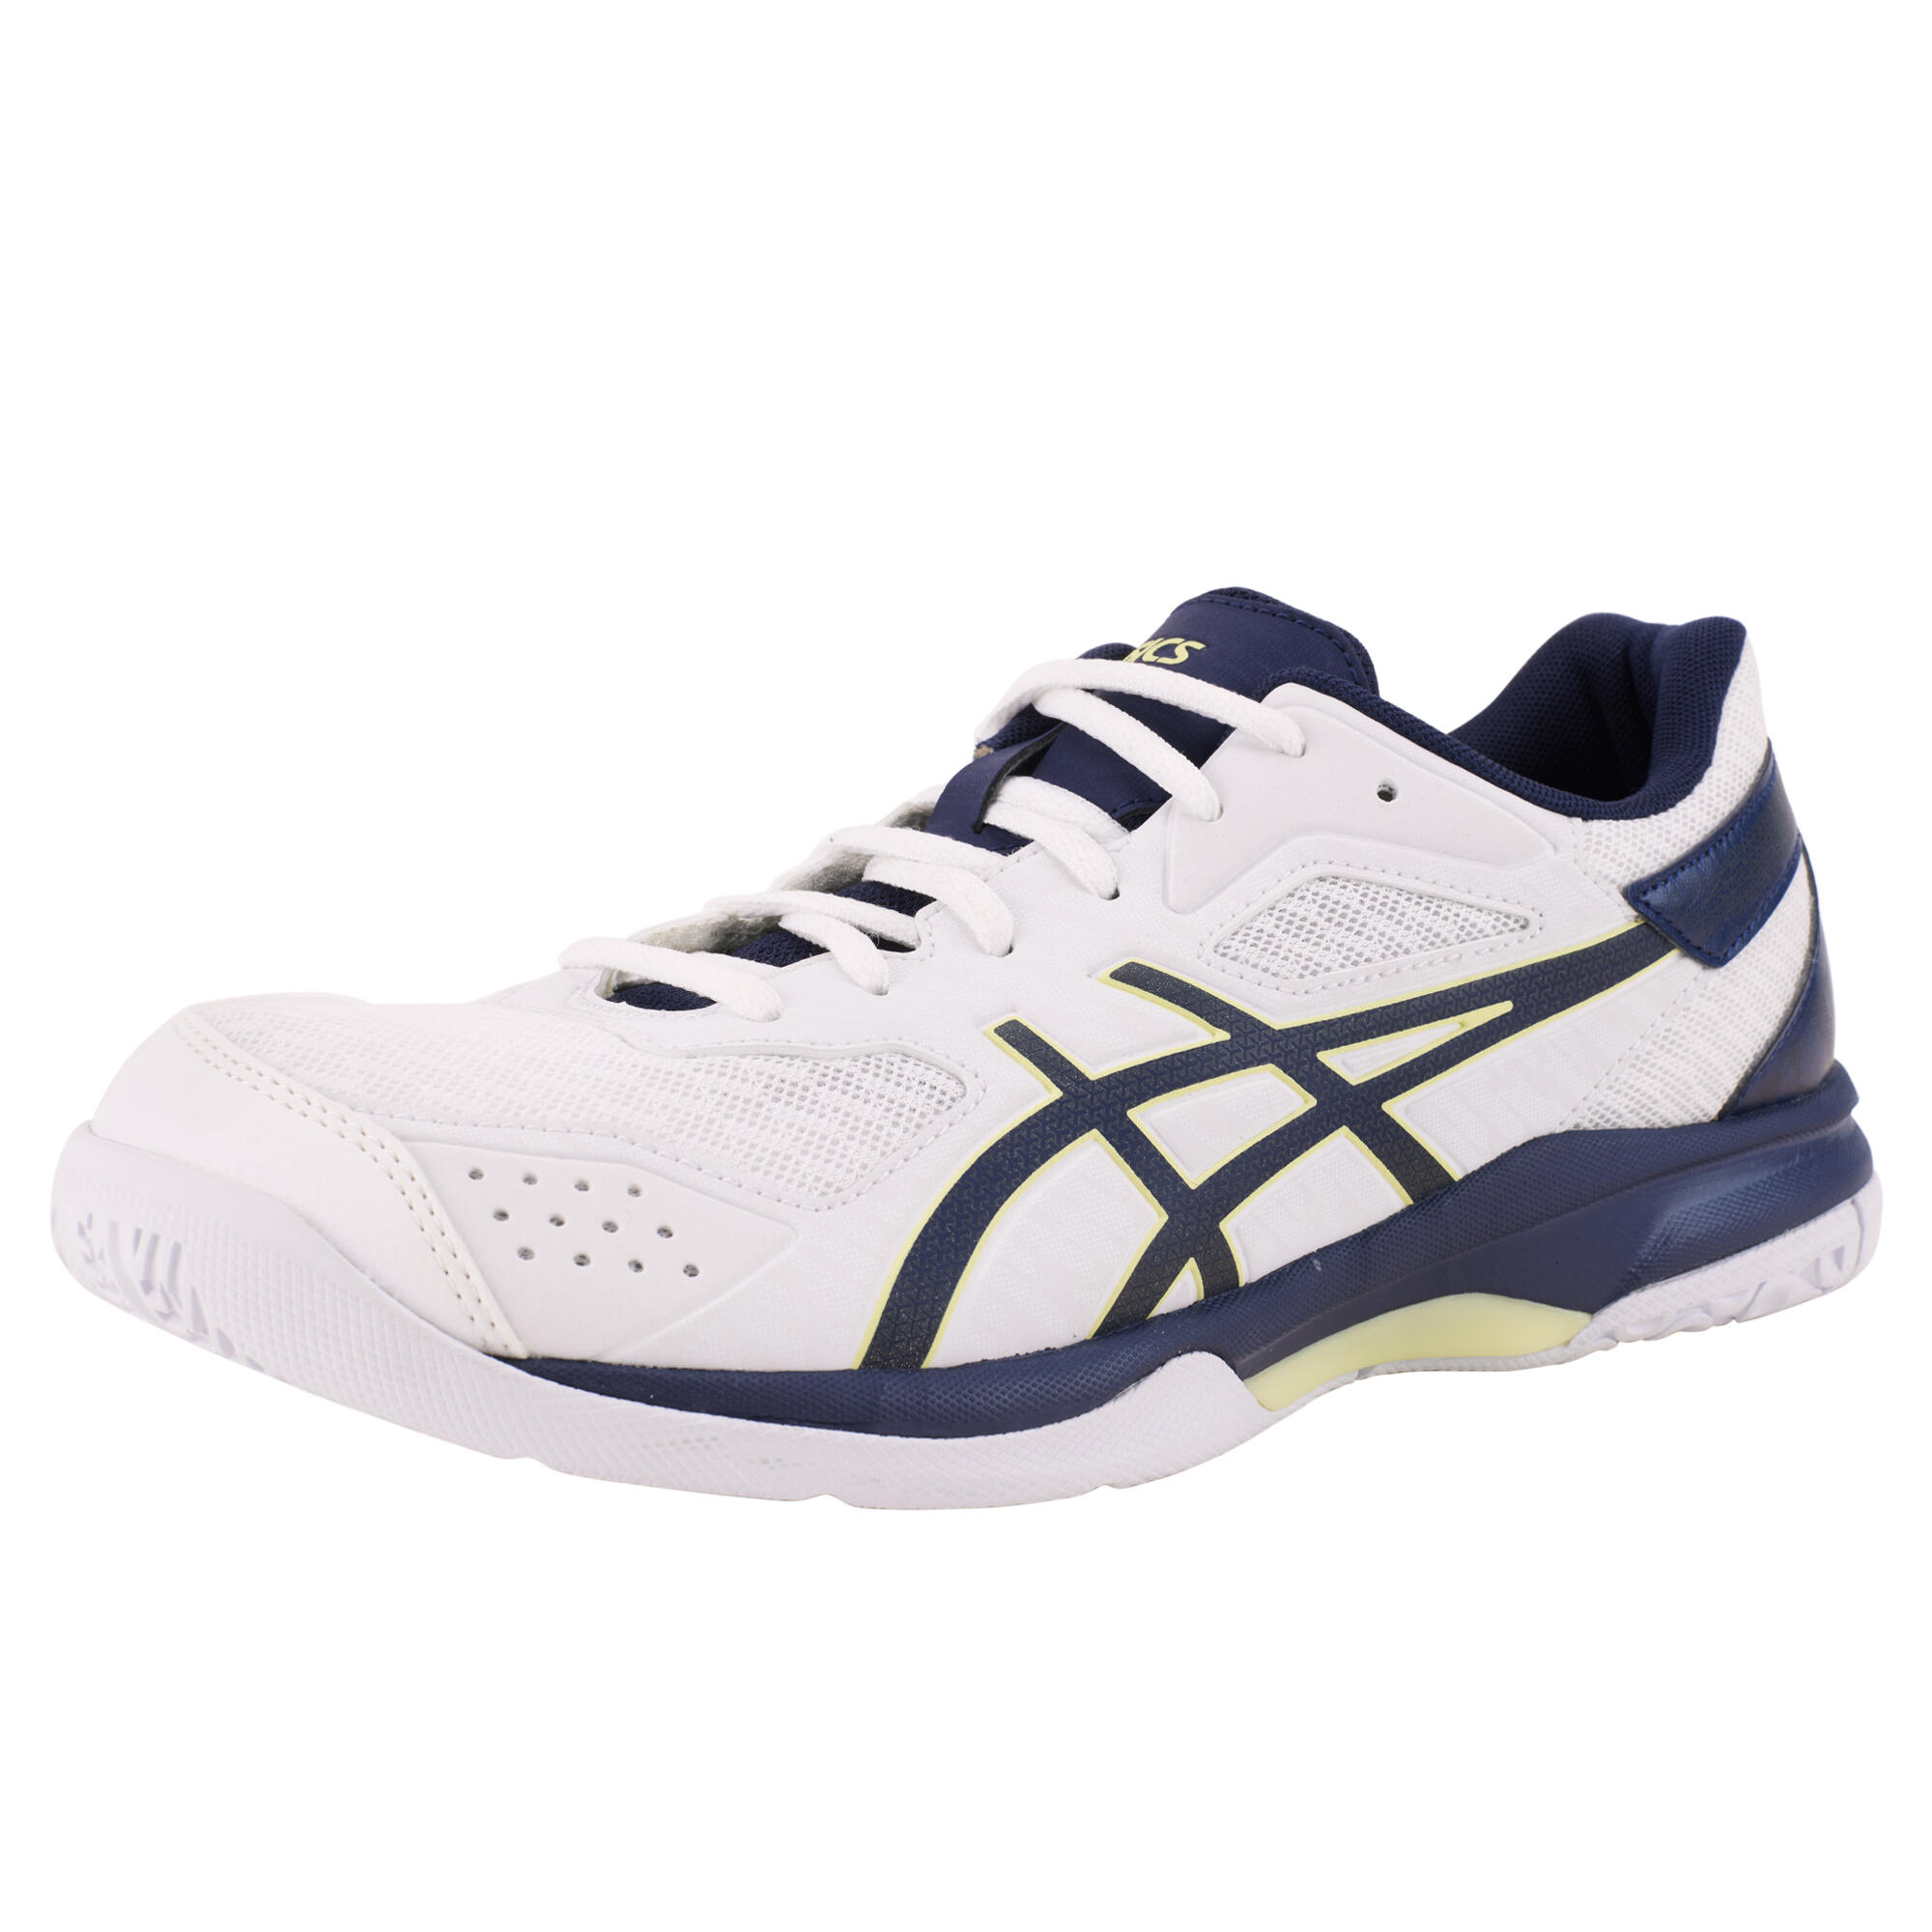 ASICS Men's Volleyball Shoes Gel Spike 4 - White/Blue/Yellow